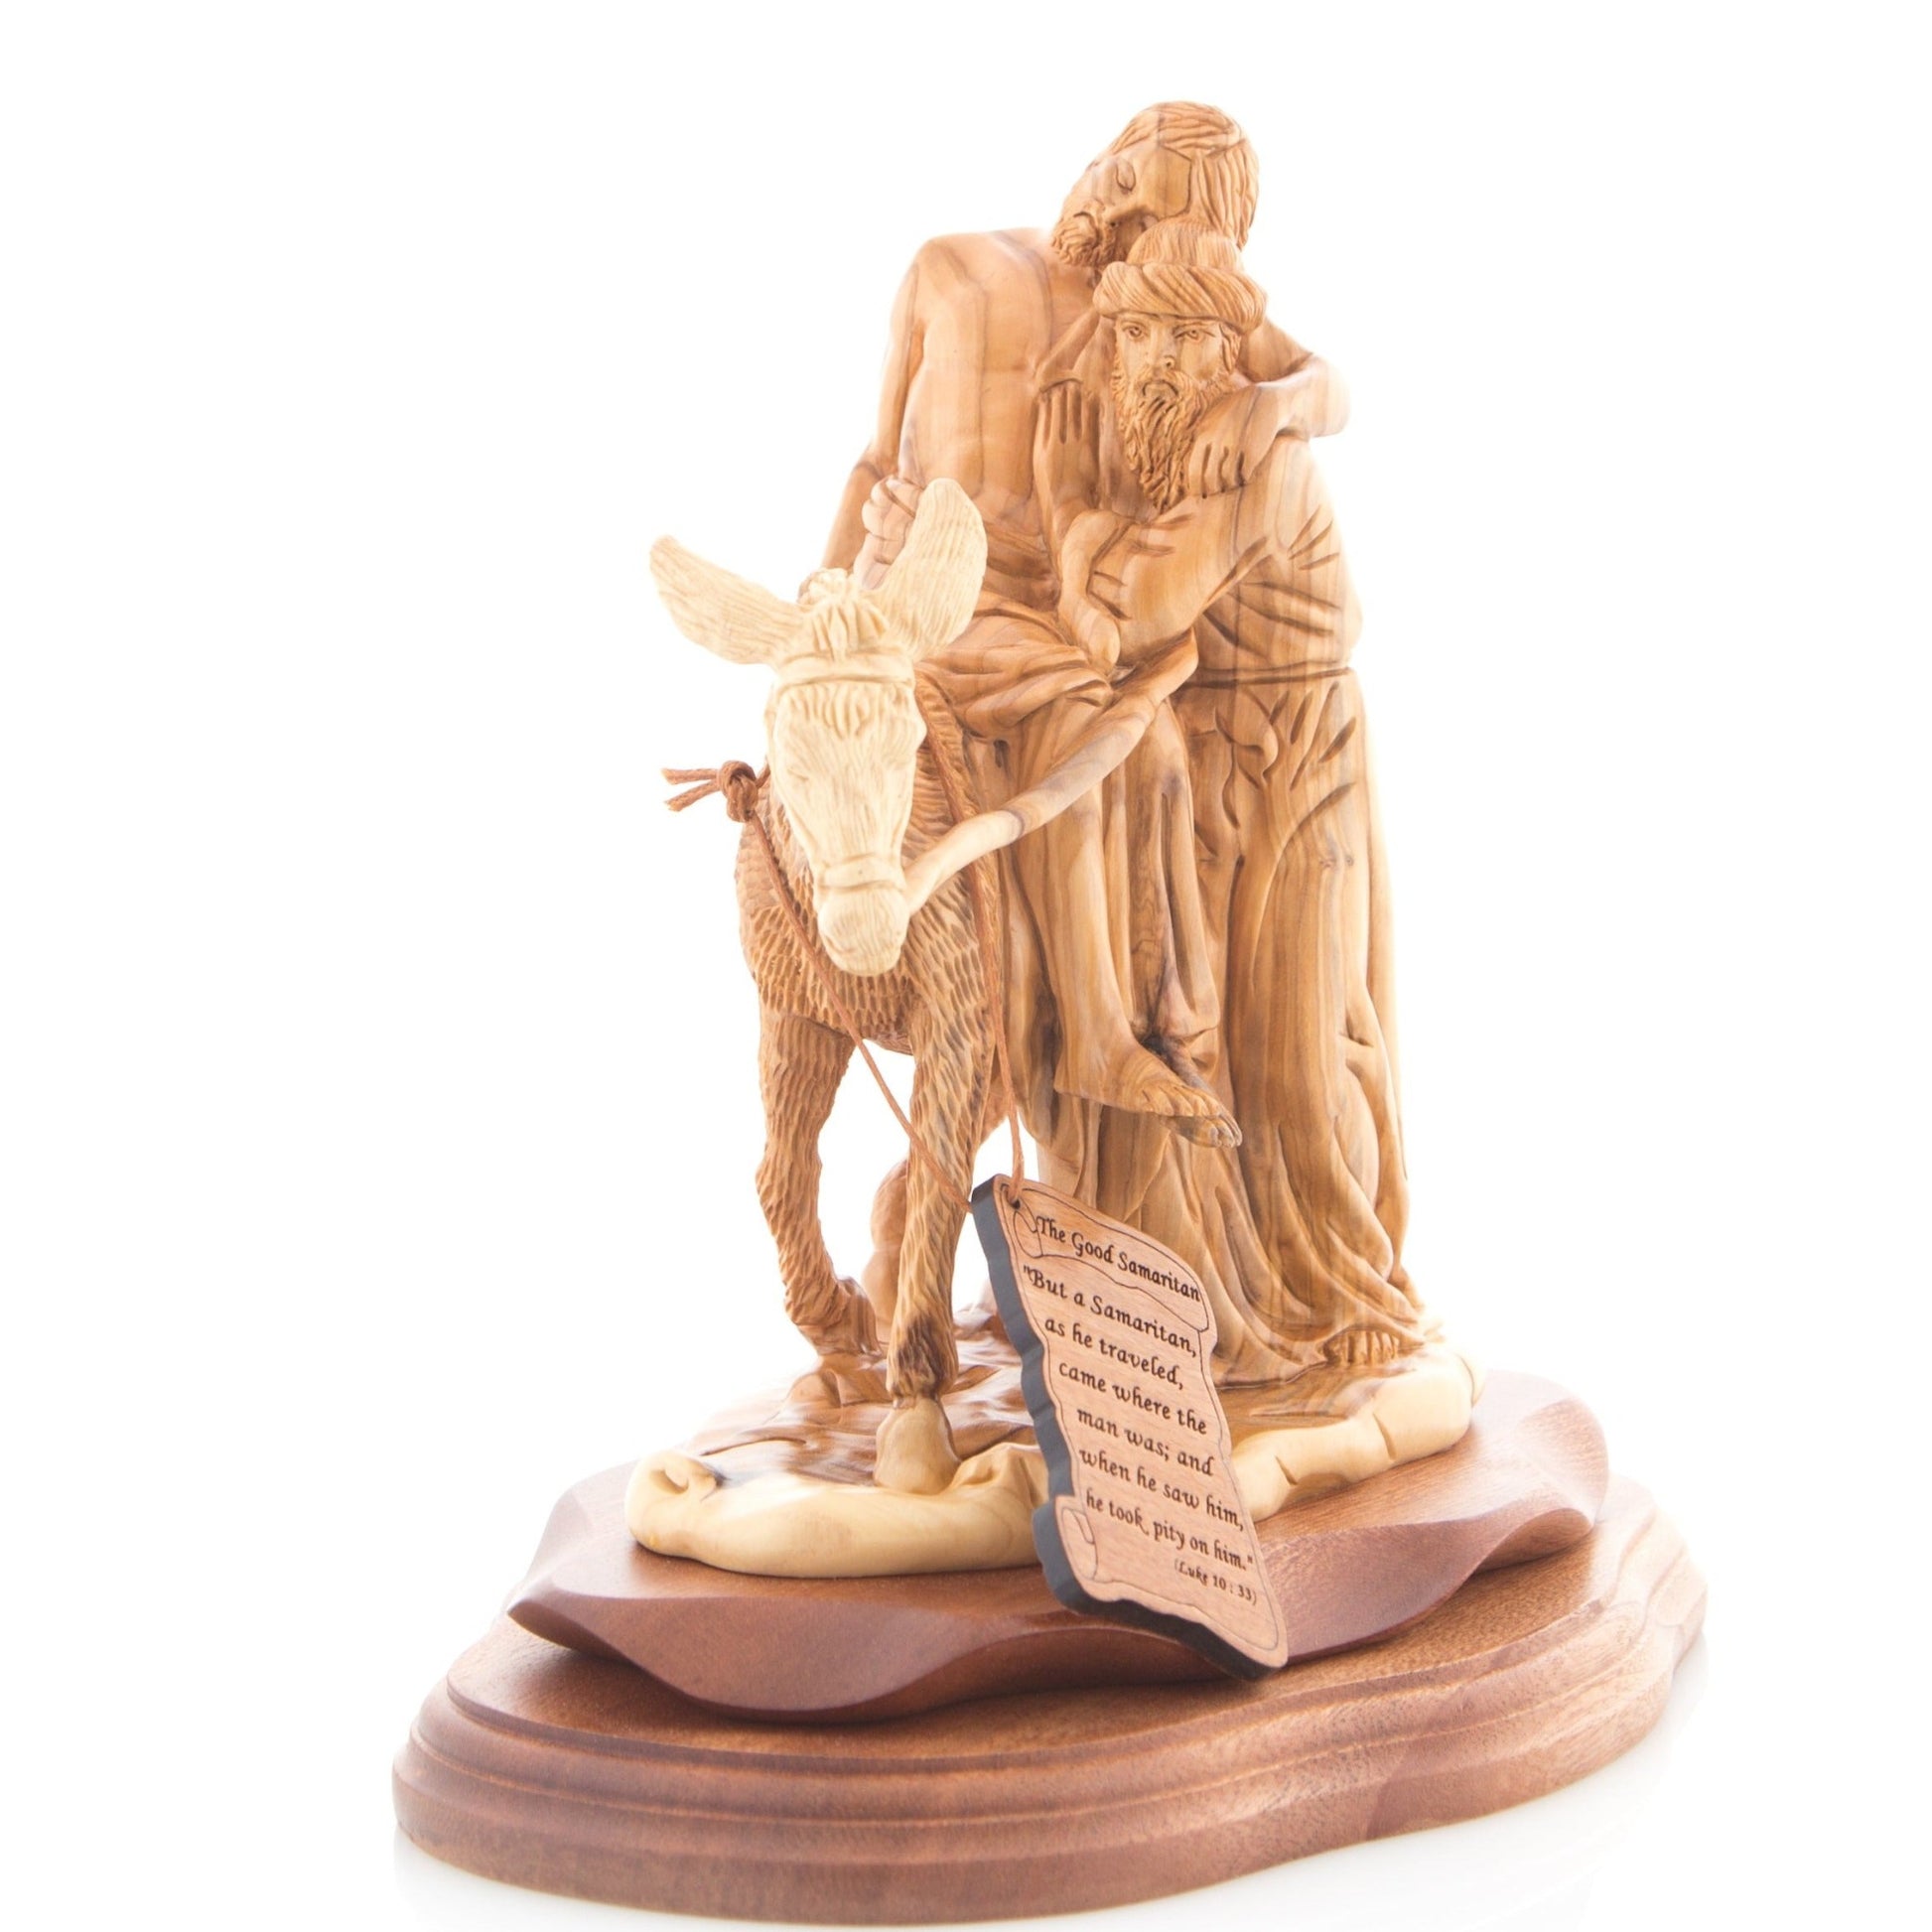 The Good Samaritan Jesus Christ Sculpture, Riding on Donkey, Biblically Inspired Christian Art  Masterpiece Carved from Olive Wood 